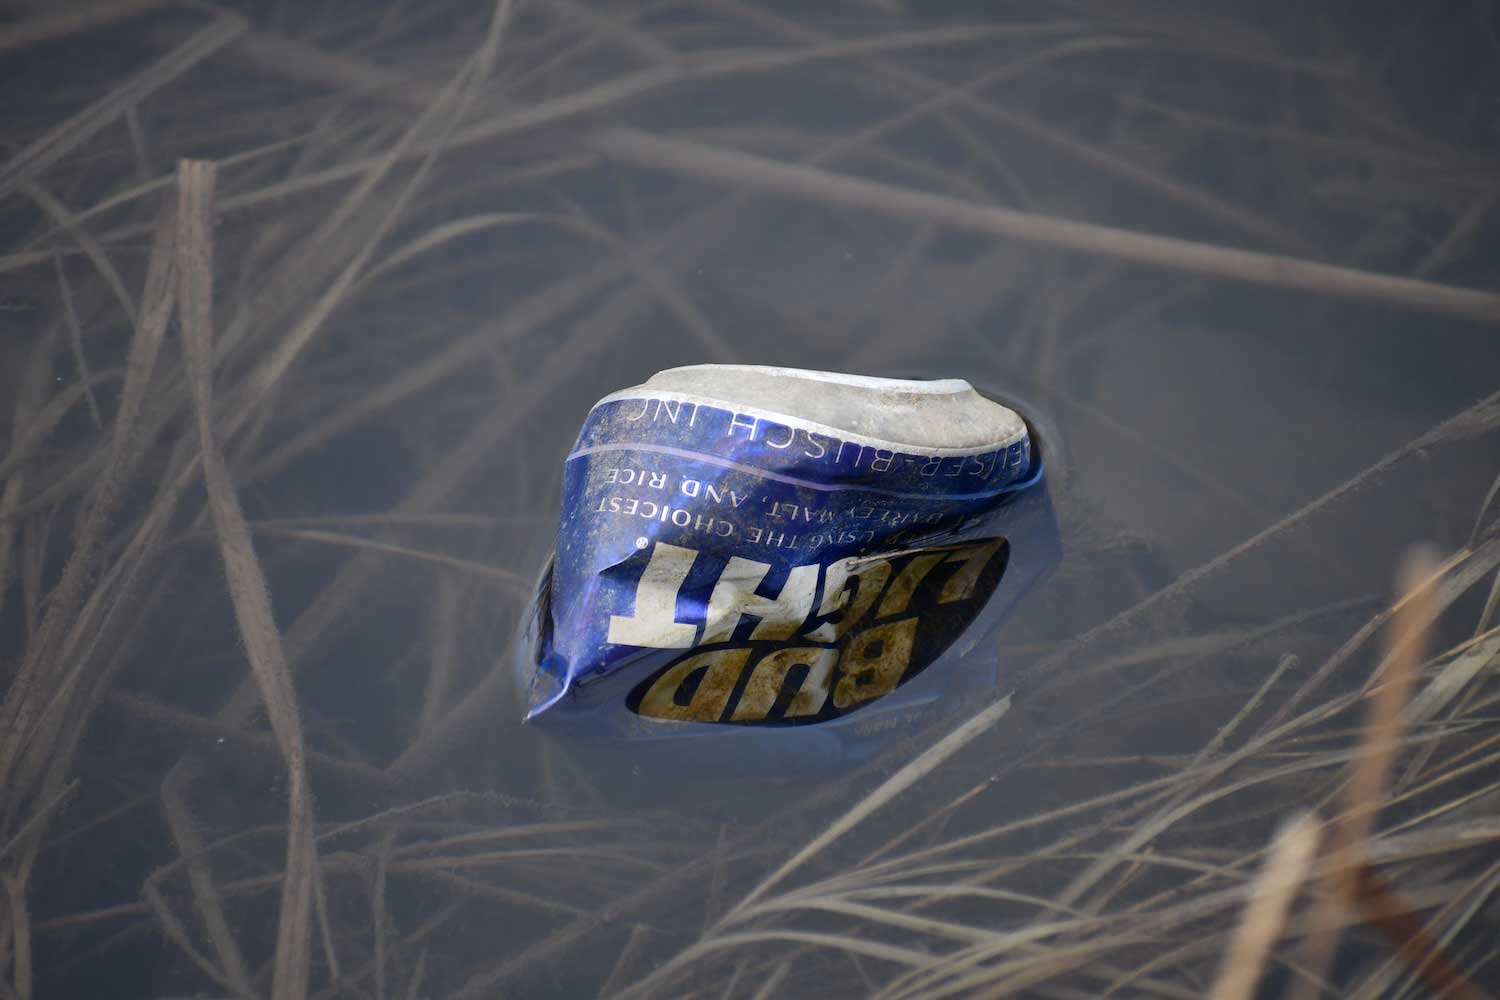 A beer can in the water.